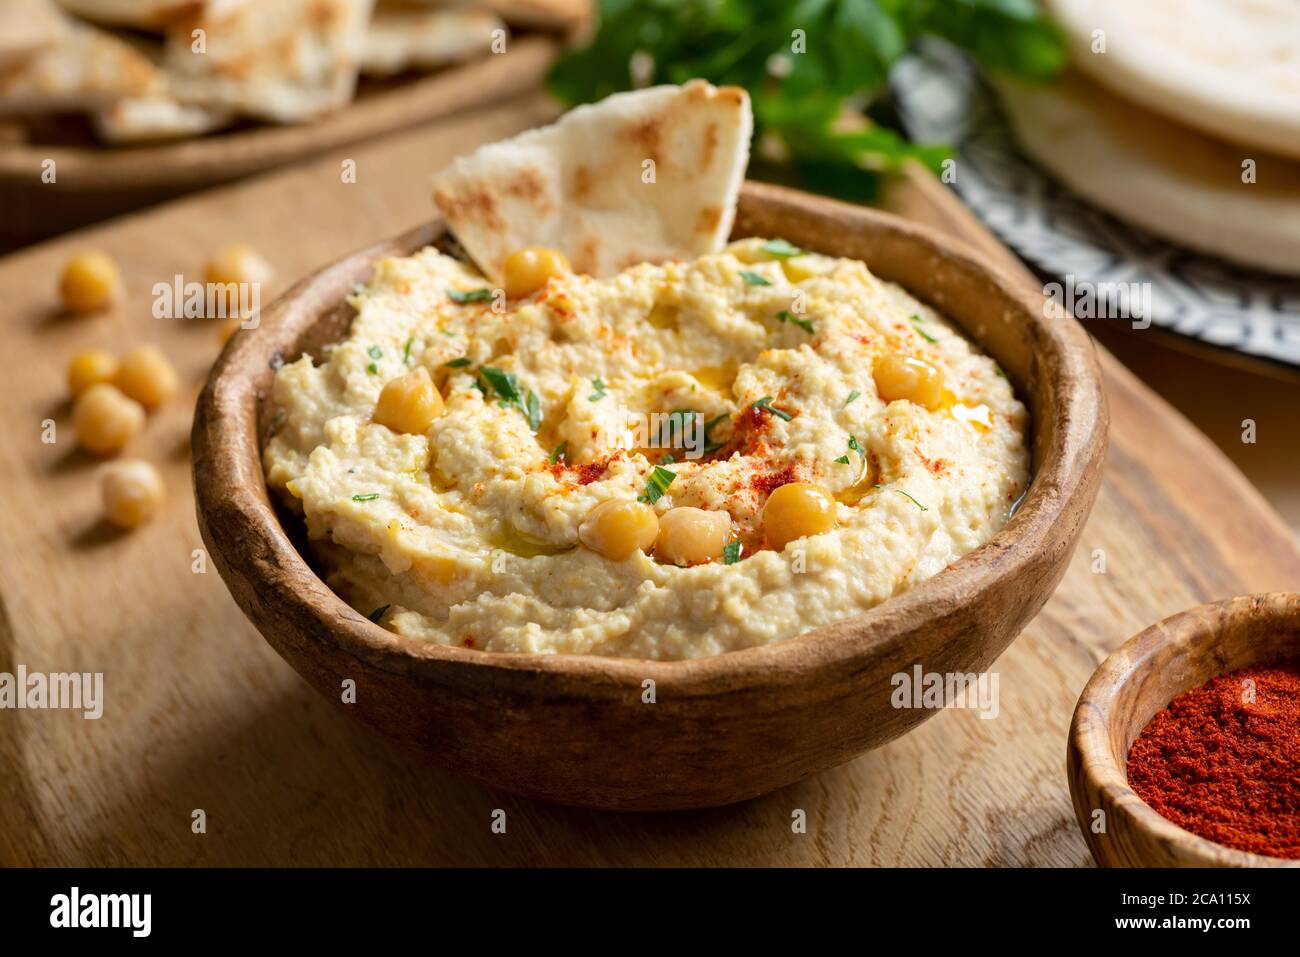 Homemade chickpea hummus bowl with pita chips and smoked paprika. Closeup view, square crop Stock Photo